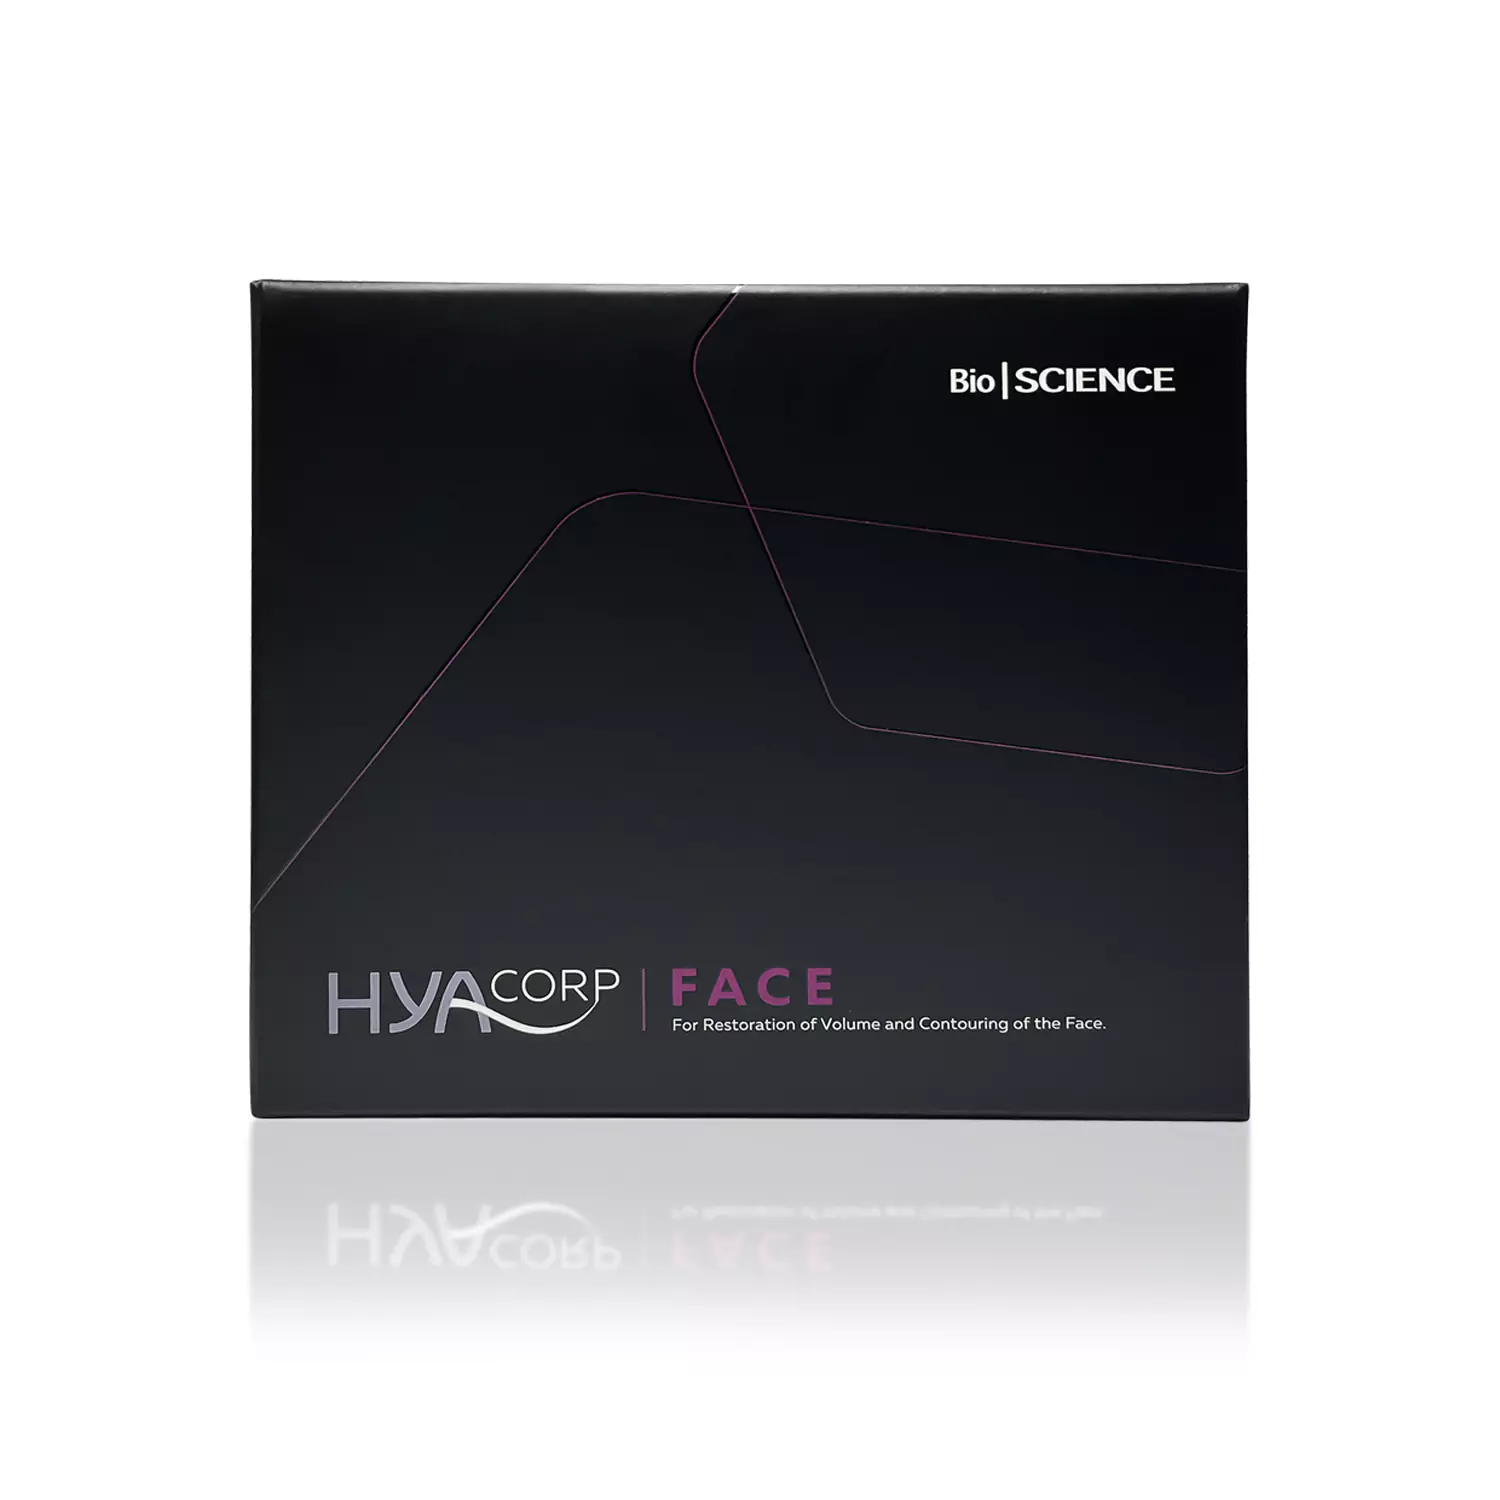 Buy HYACORP FACE®  online